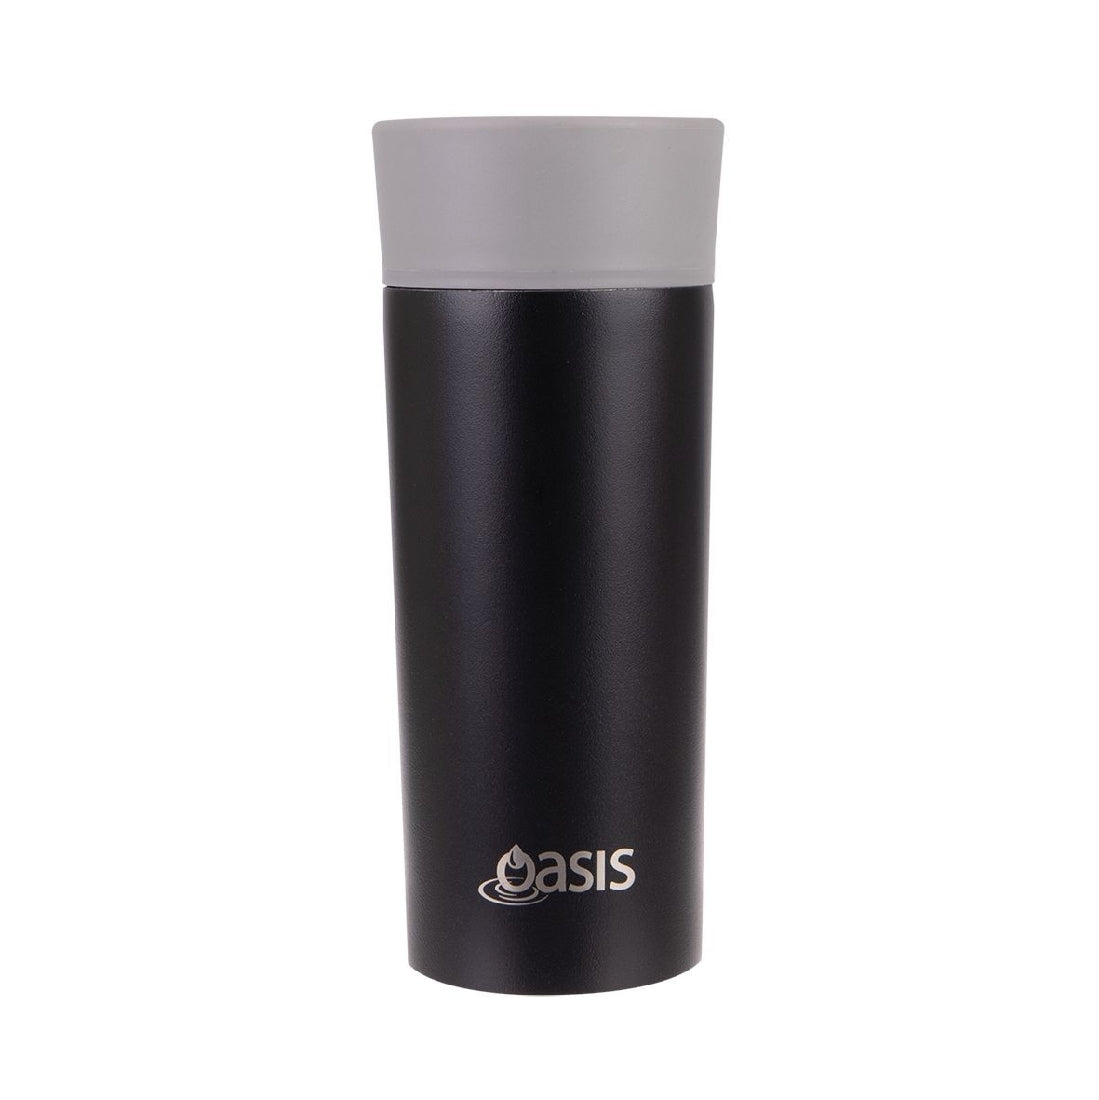 Oasis Stainless Steel Double Wall Insulated Travel Mug 360ml - Black